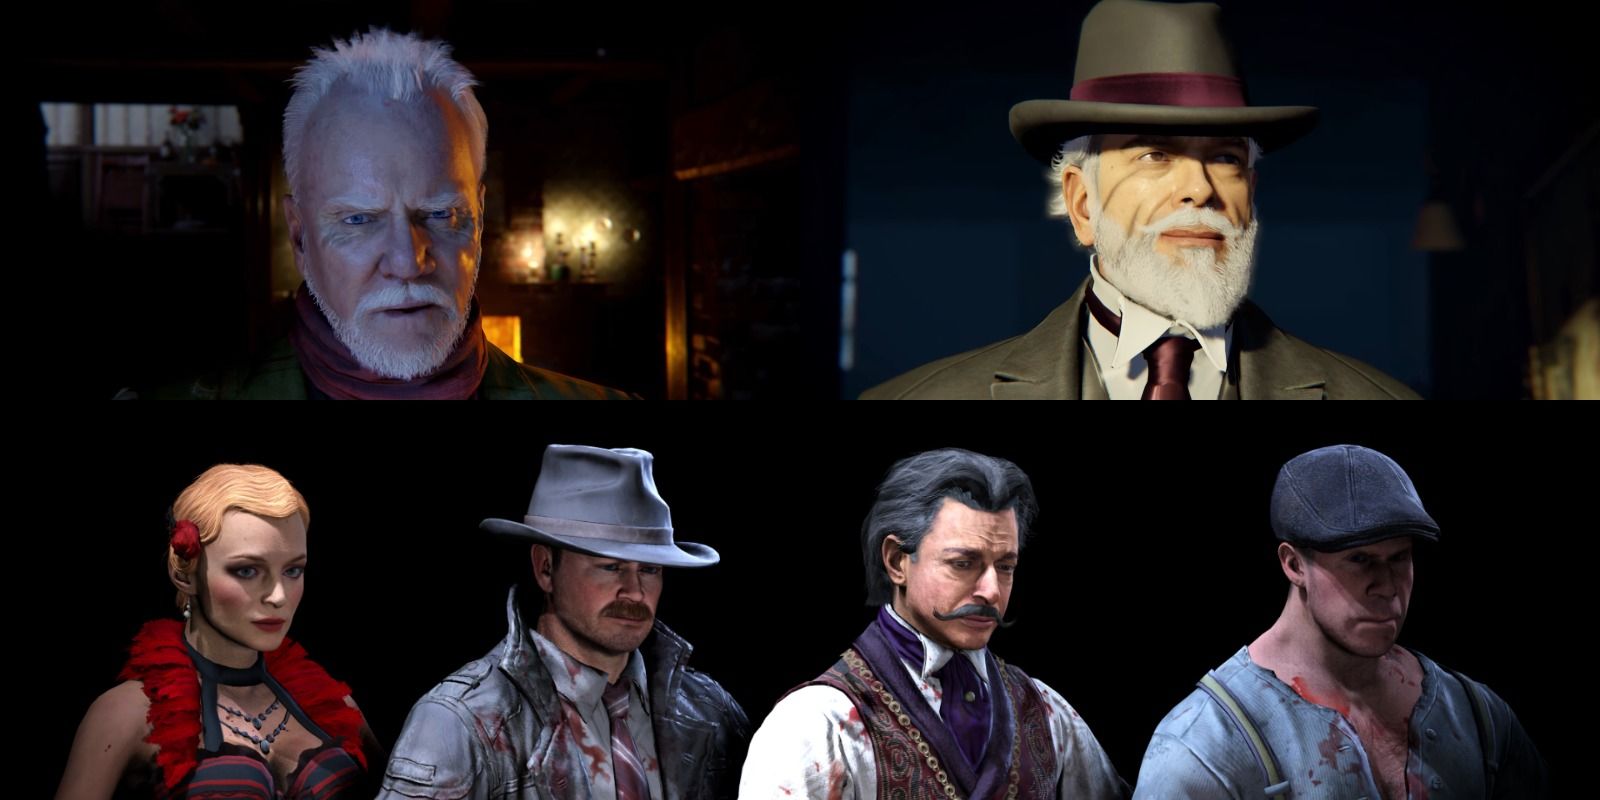 The Shadows Of Evil crew, Monty, and Shadow Man in Call Of Duty Black Ops III Zombies